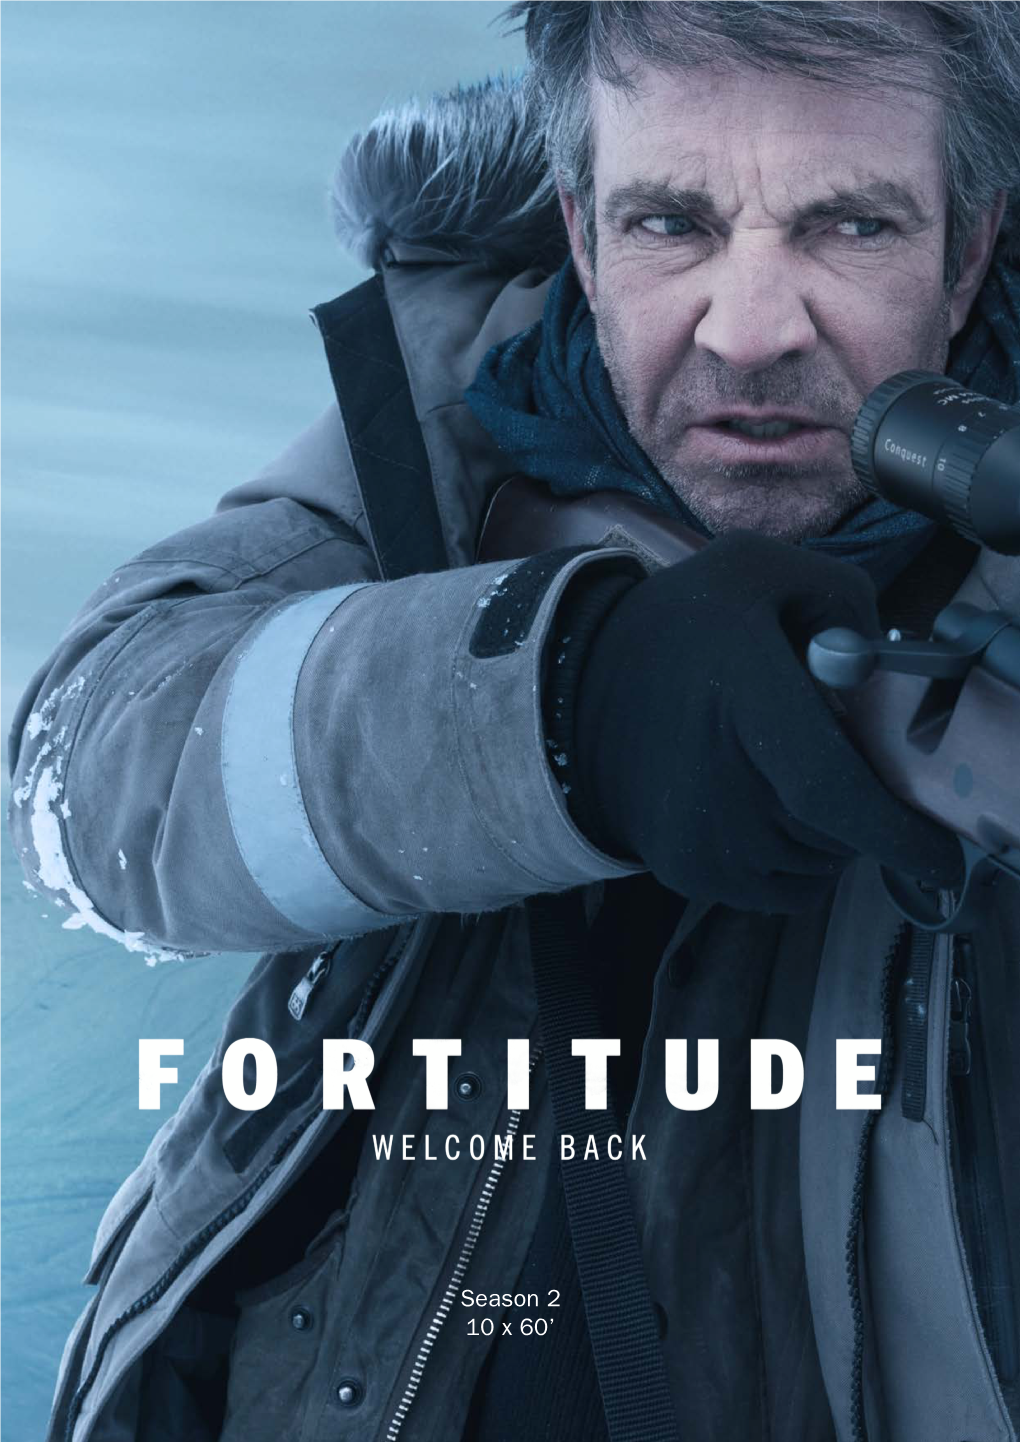 Season 2 10 X 60’ WELCOME BACK to FORTITUDE